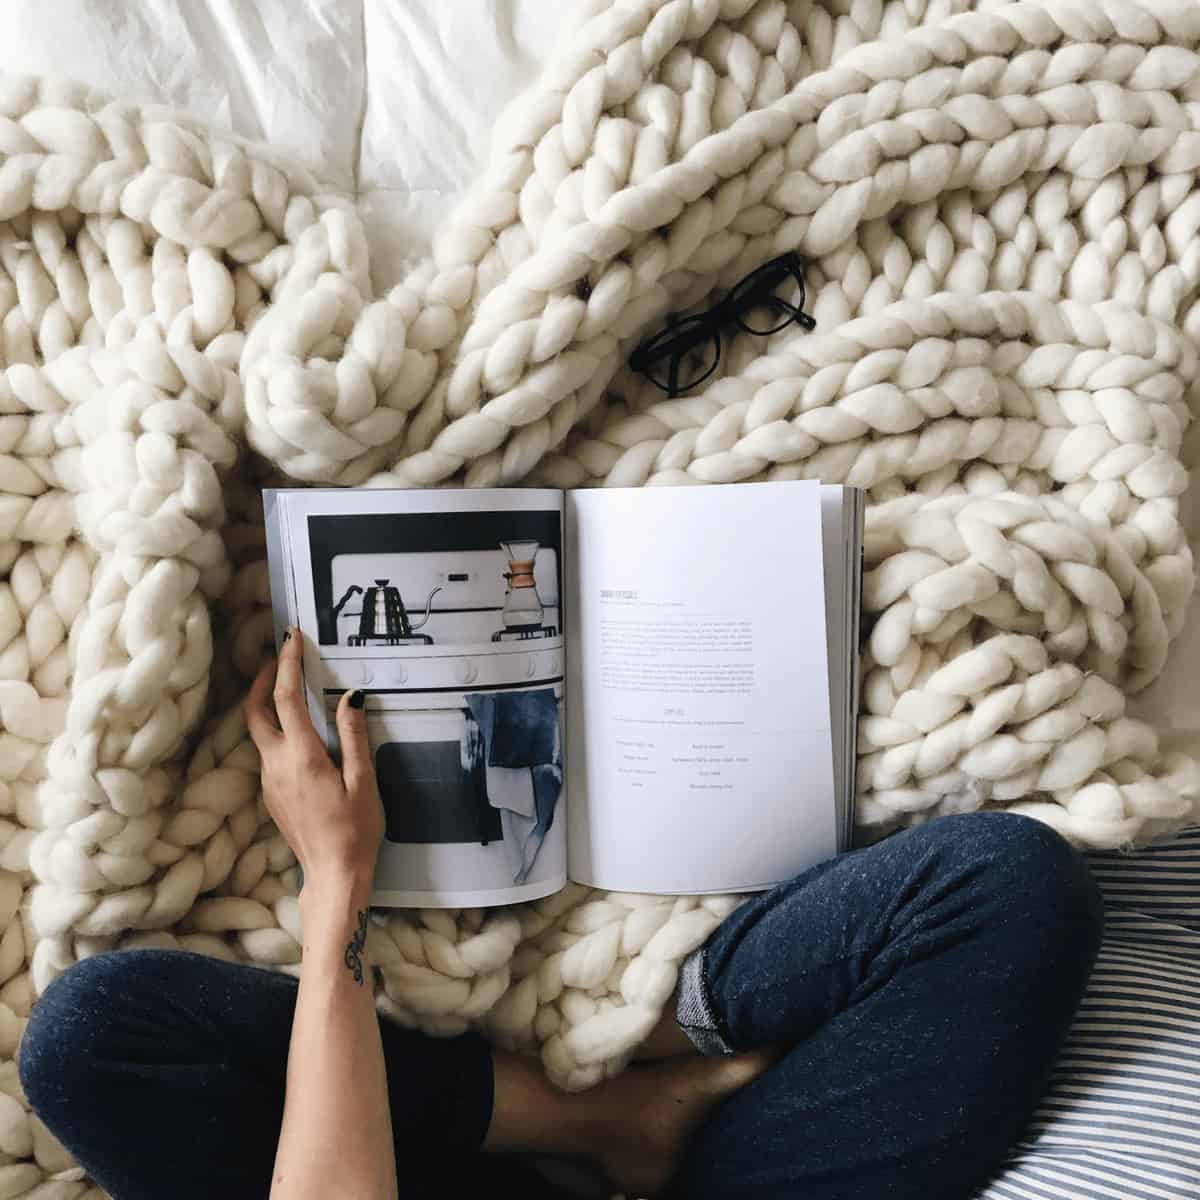 5 Tips for Planning a Cozy Hygge Party - Ditch the winter blues by pausing to celebrate slow at a cozy party with friends and family *Love these planning tips